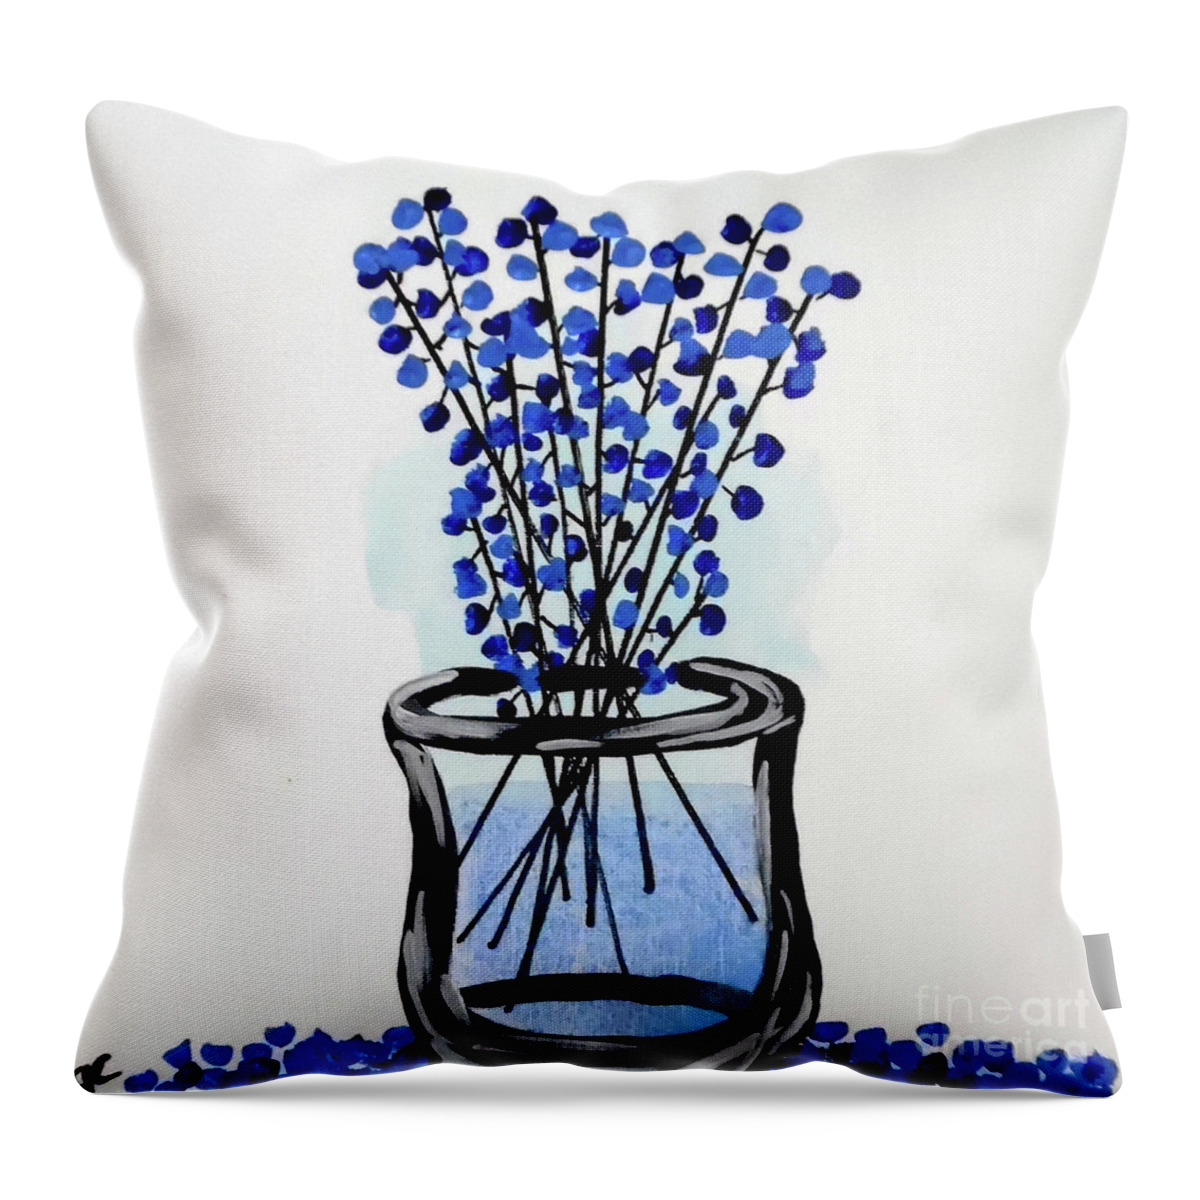 Vase Of Flowers Throw Pillow featuring the painting Indigo Falls by Jilian Cramb - AMothersFineArt